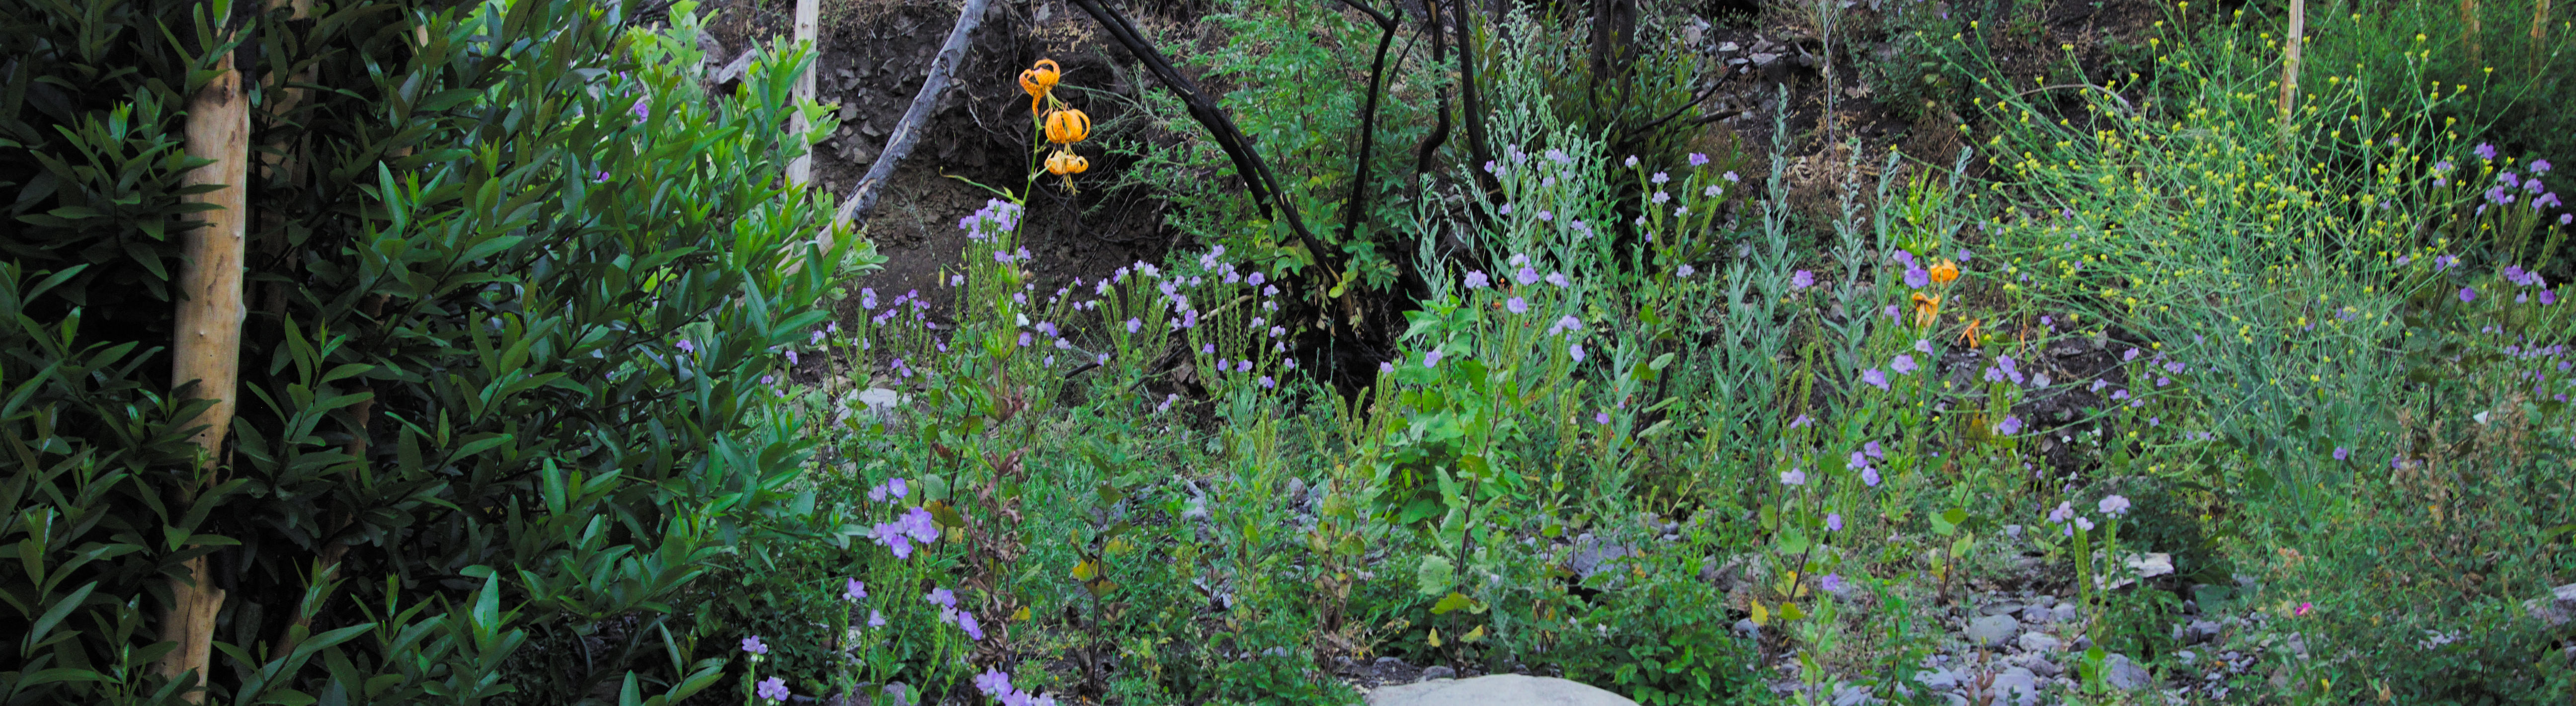 A variety of wildflowers flourish in a shady glade in Southern California.